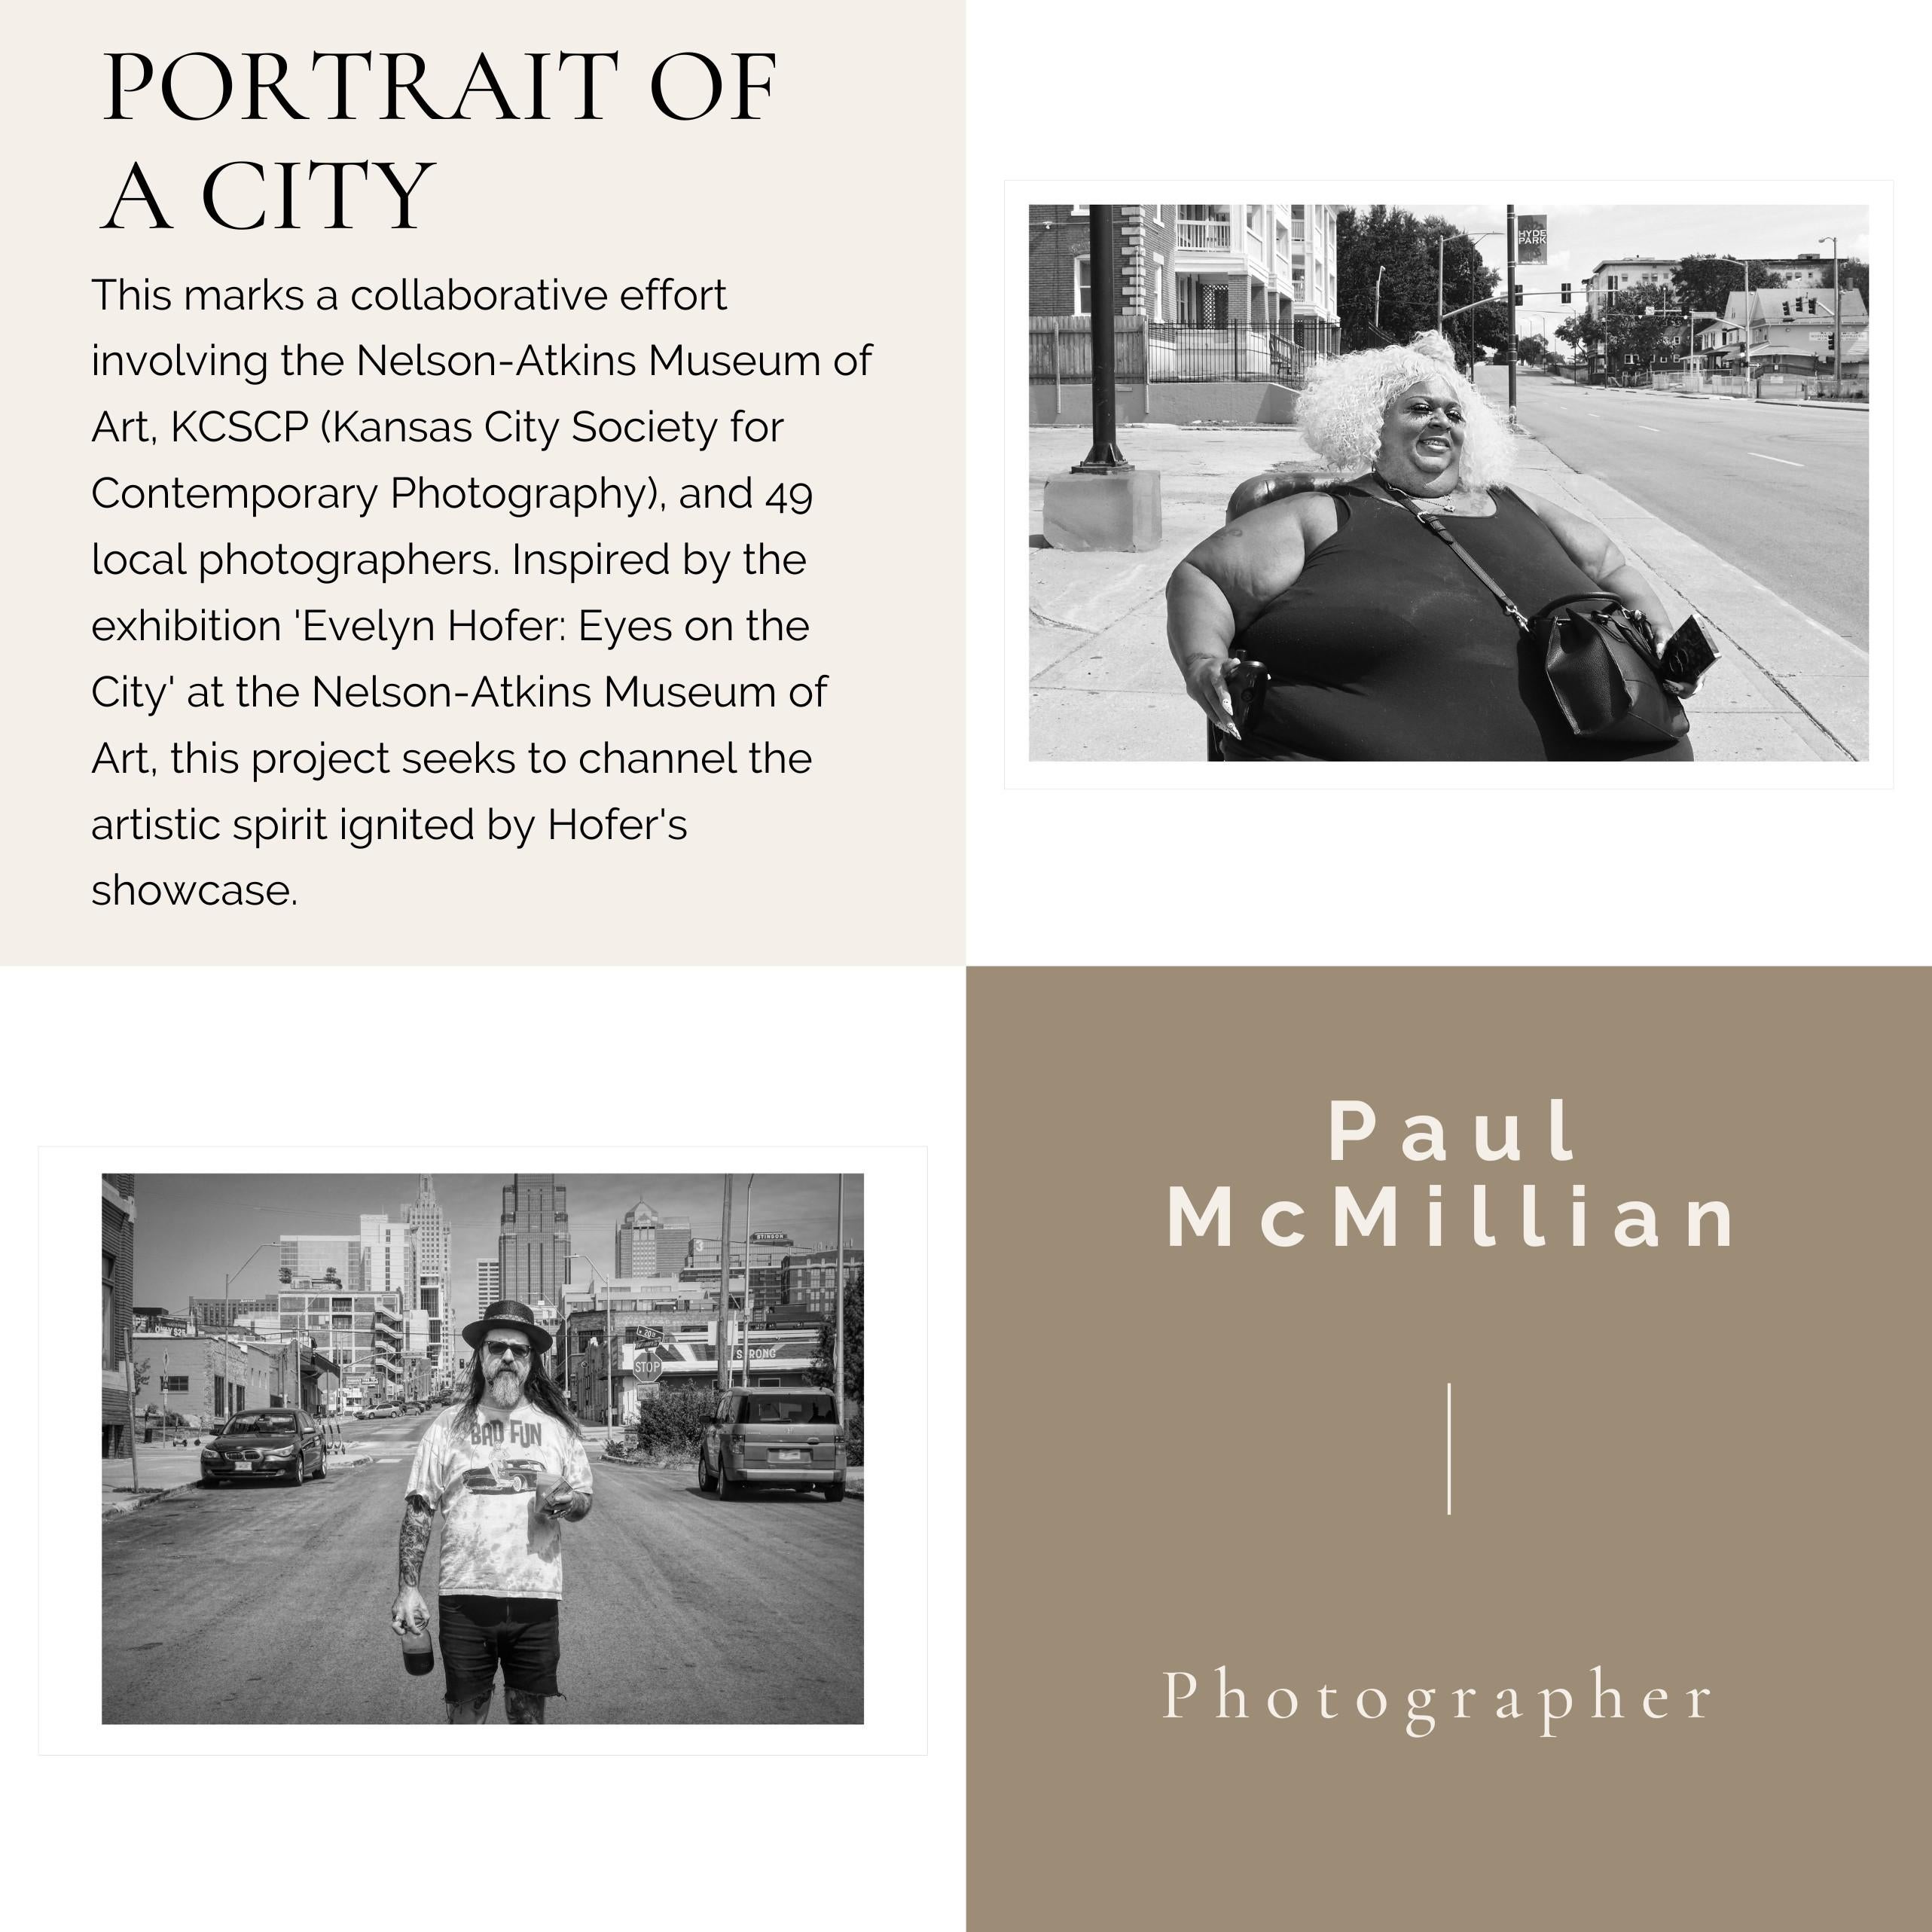 Paul McMillian
Hyde Park
Year: 2024
Archival Pigment Print on
Hahnemuehle Baryta Rag
Framed Size: 13 x 13 x 0.25 inches
COA provided

*Ready to hang; matted and framed in a minimal black frame made from composite wood with standard plex

From